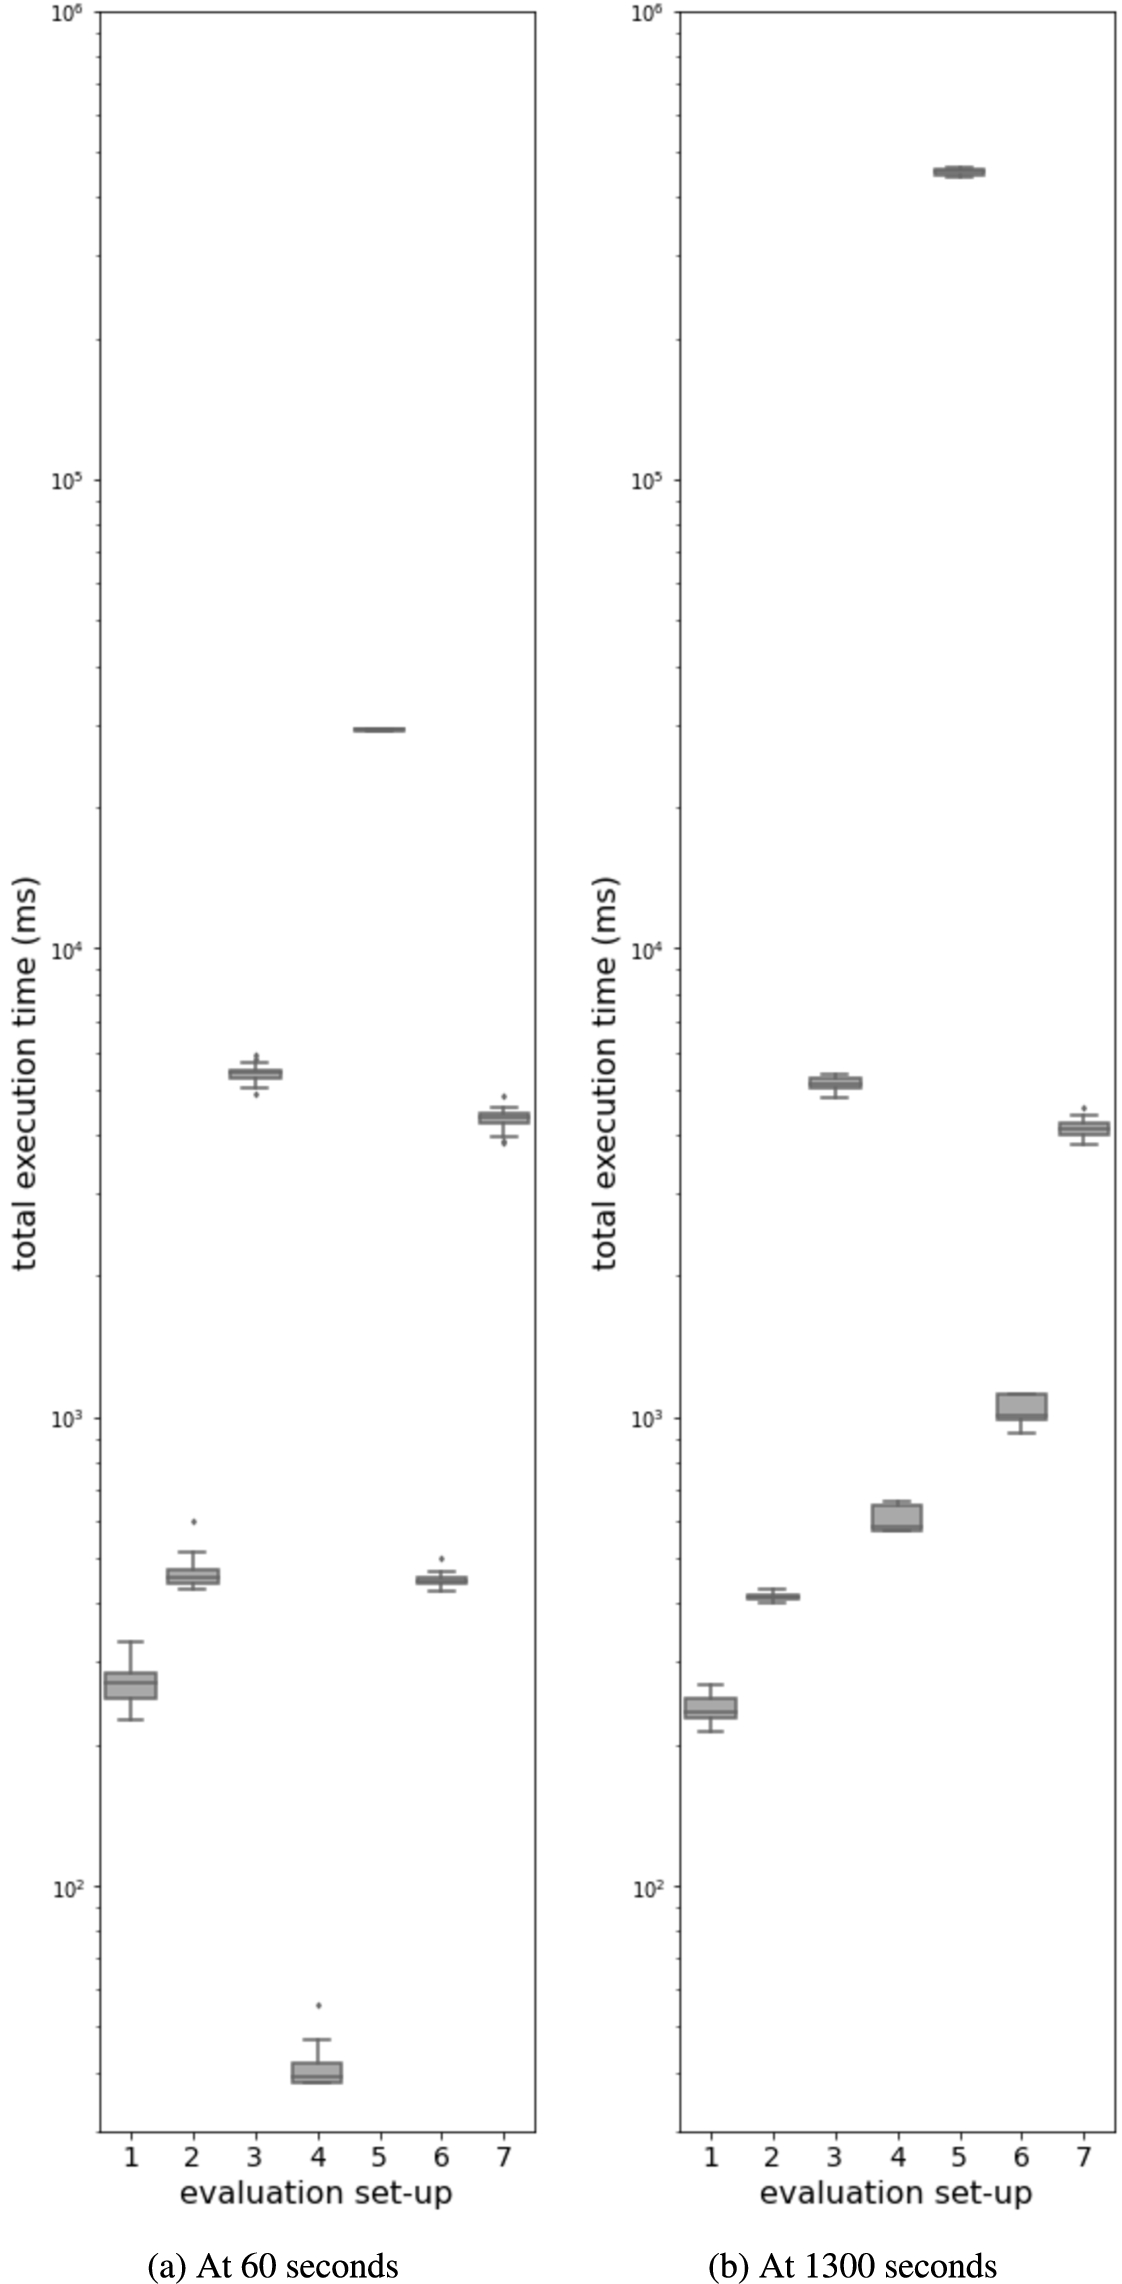 Results of the comparison of the DIVIDE real-time query evaluation approach with real-time reasoning approaches, for the brushing teeth query. For each evaluation set-up, the results show a boxplot distribution of the total execution time from the generation event (either a windowed event in a streaming set-up or an incoming event in a non-streaming set-up) until the routine activity prediction as output of the (final) query. The distribution is shown for two timestamps corresponding to the mean values for this timestamp plotted in Fig. 7.